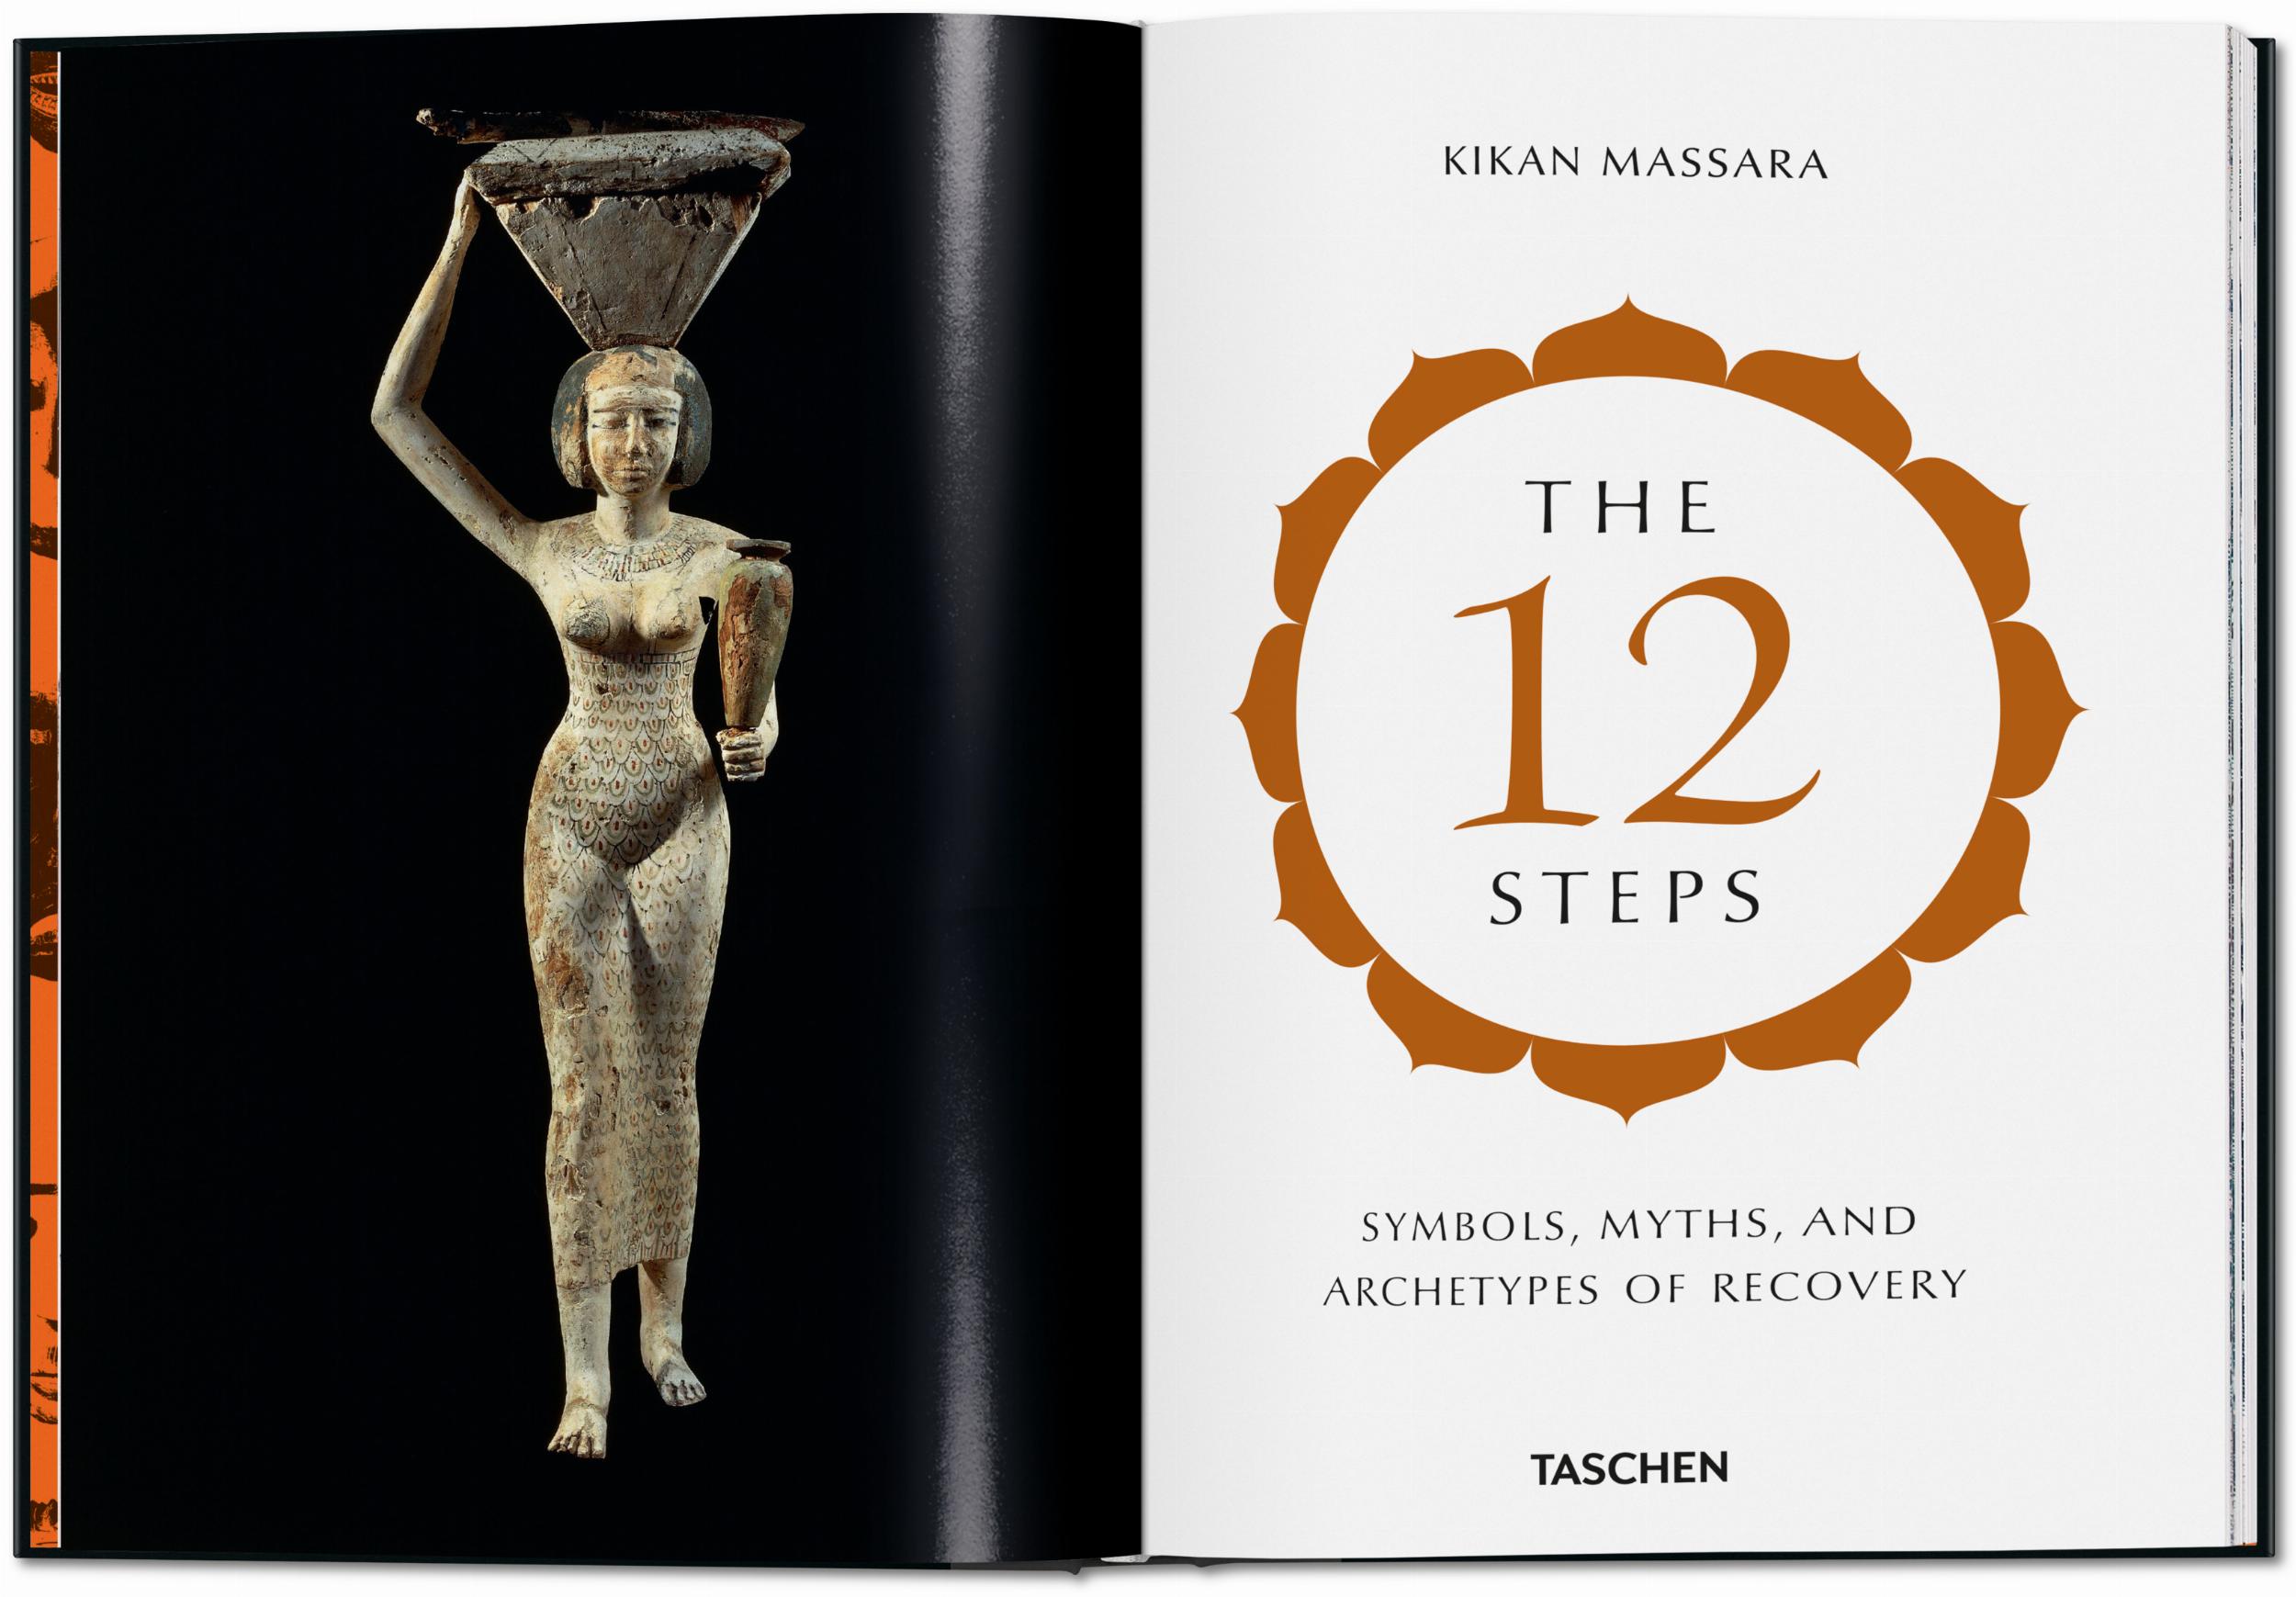 The 12 Steps